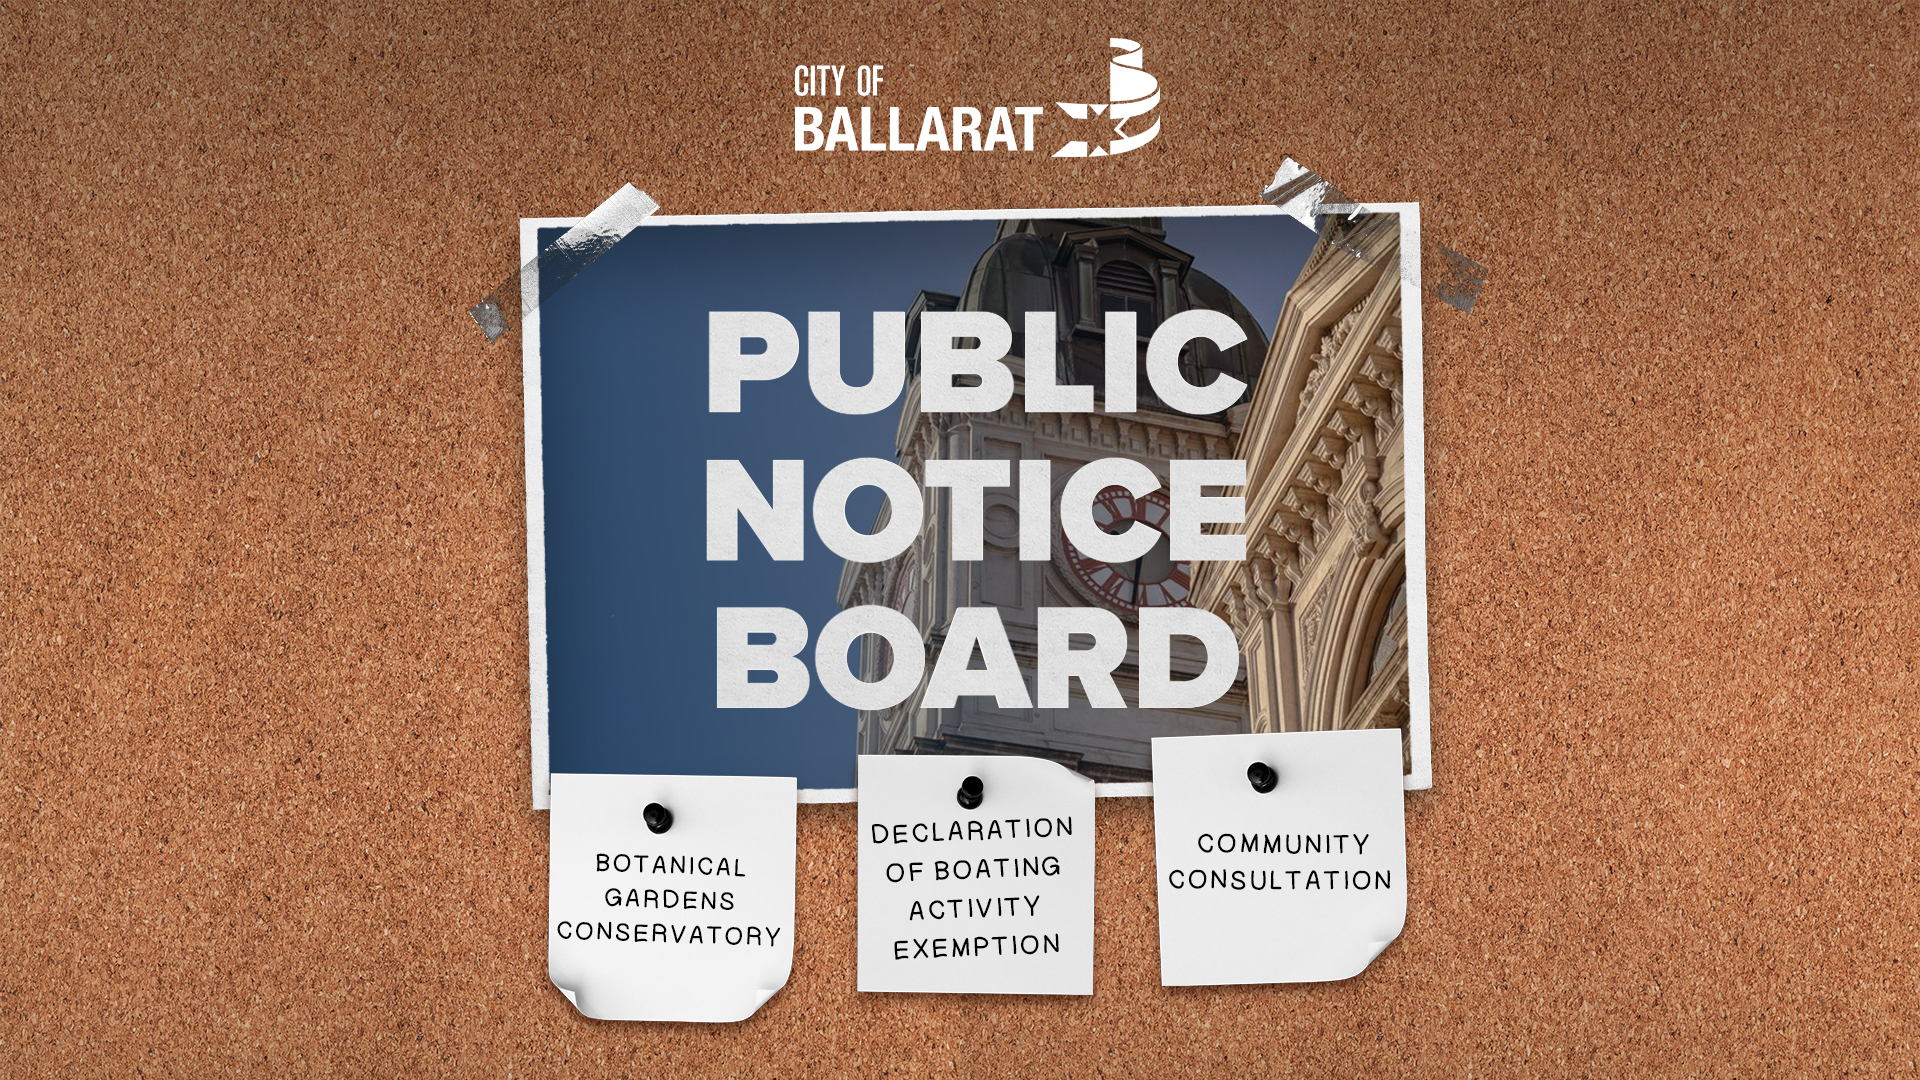 Notice board with Public Notice Board text over an image of Ballarat Town Hall. Three notes underneath with text saying BALLARAT BOTANICAL GARDENS CONSERVATORY, DECLARATION OF BOATING ACTIVITY EXEMPTION, Community Consultation